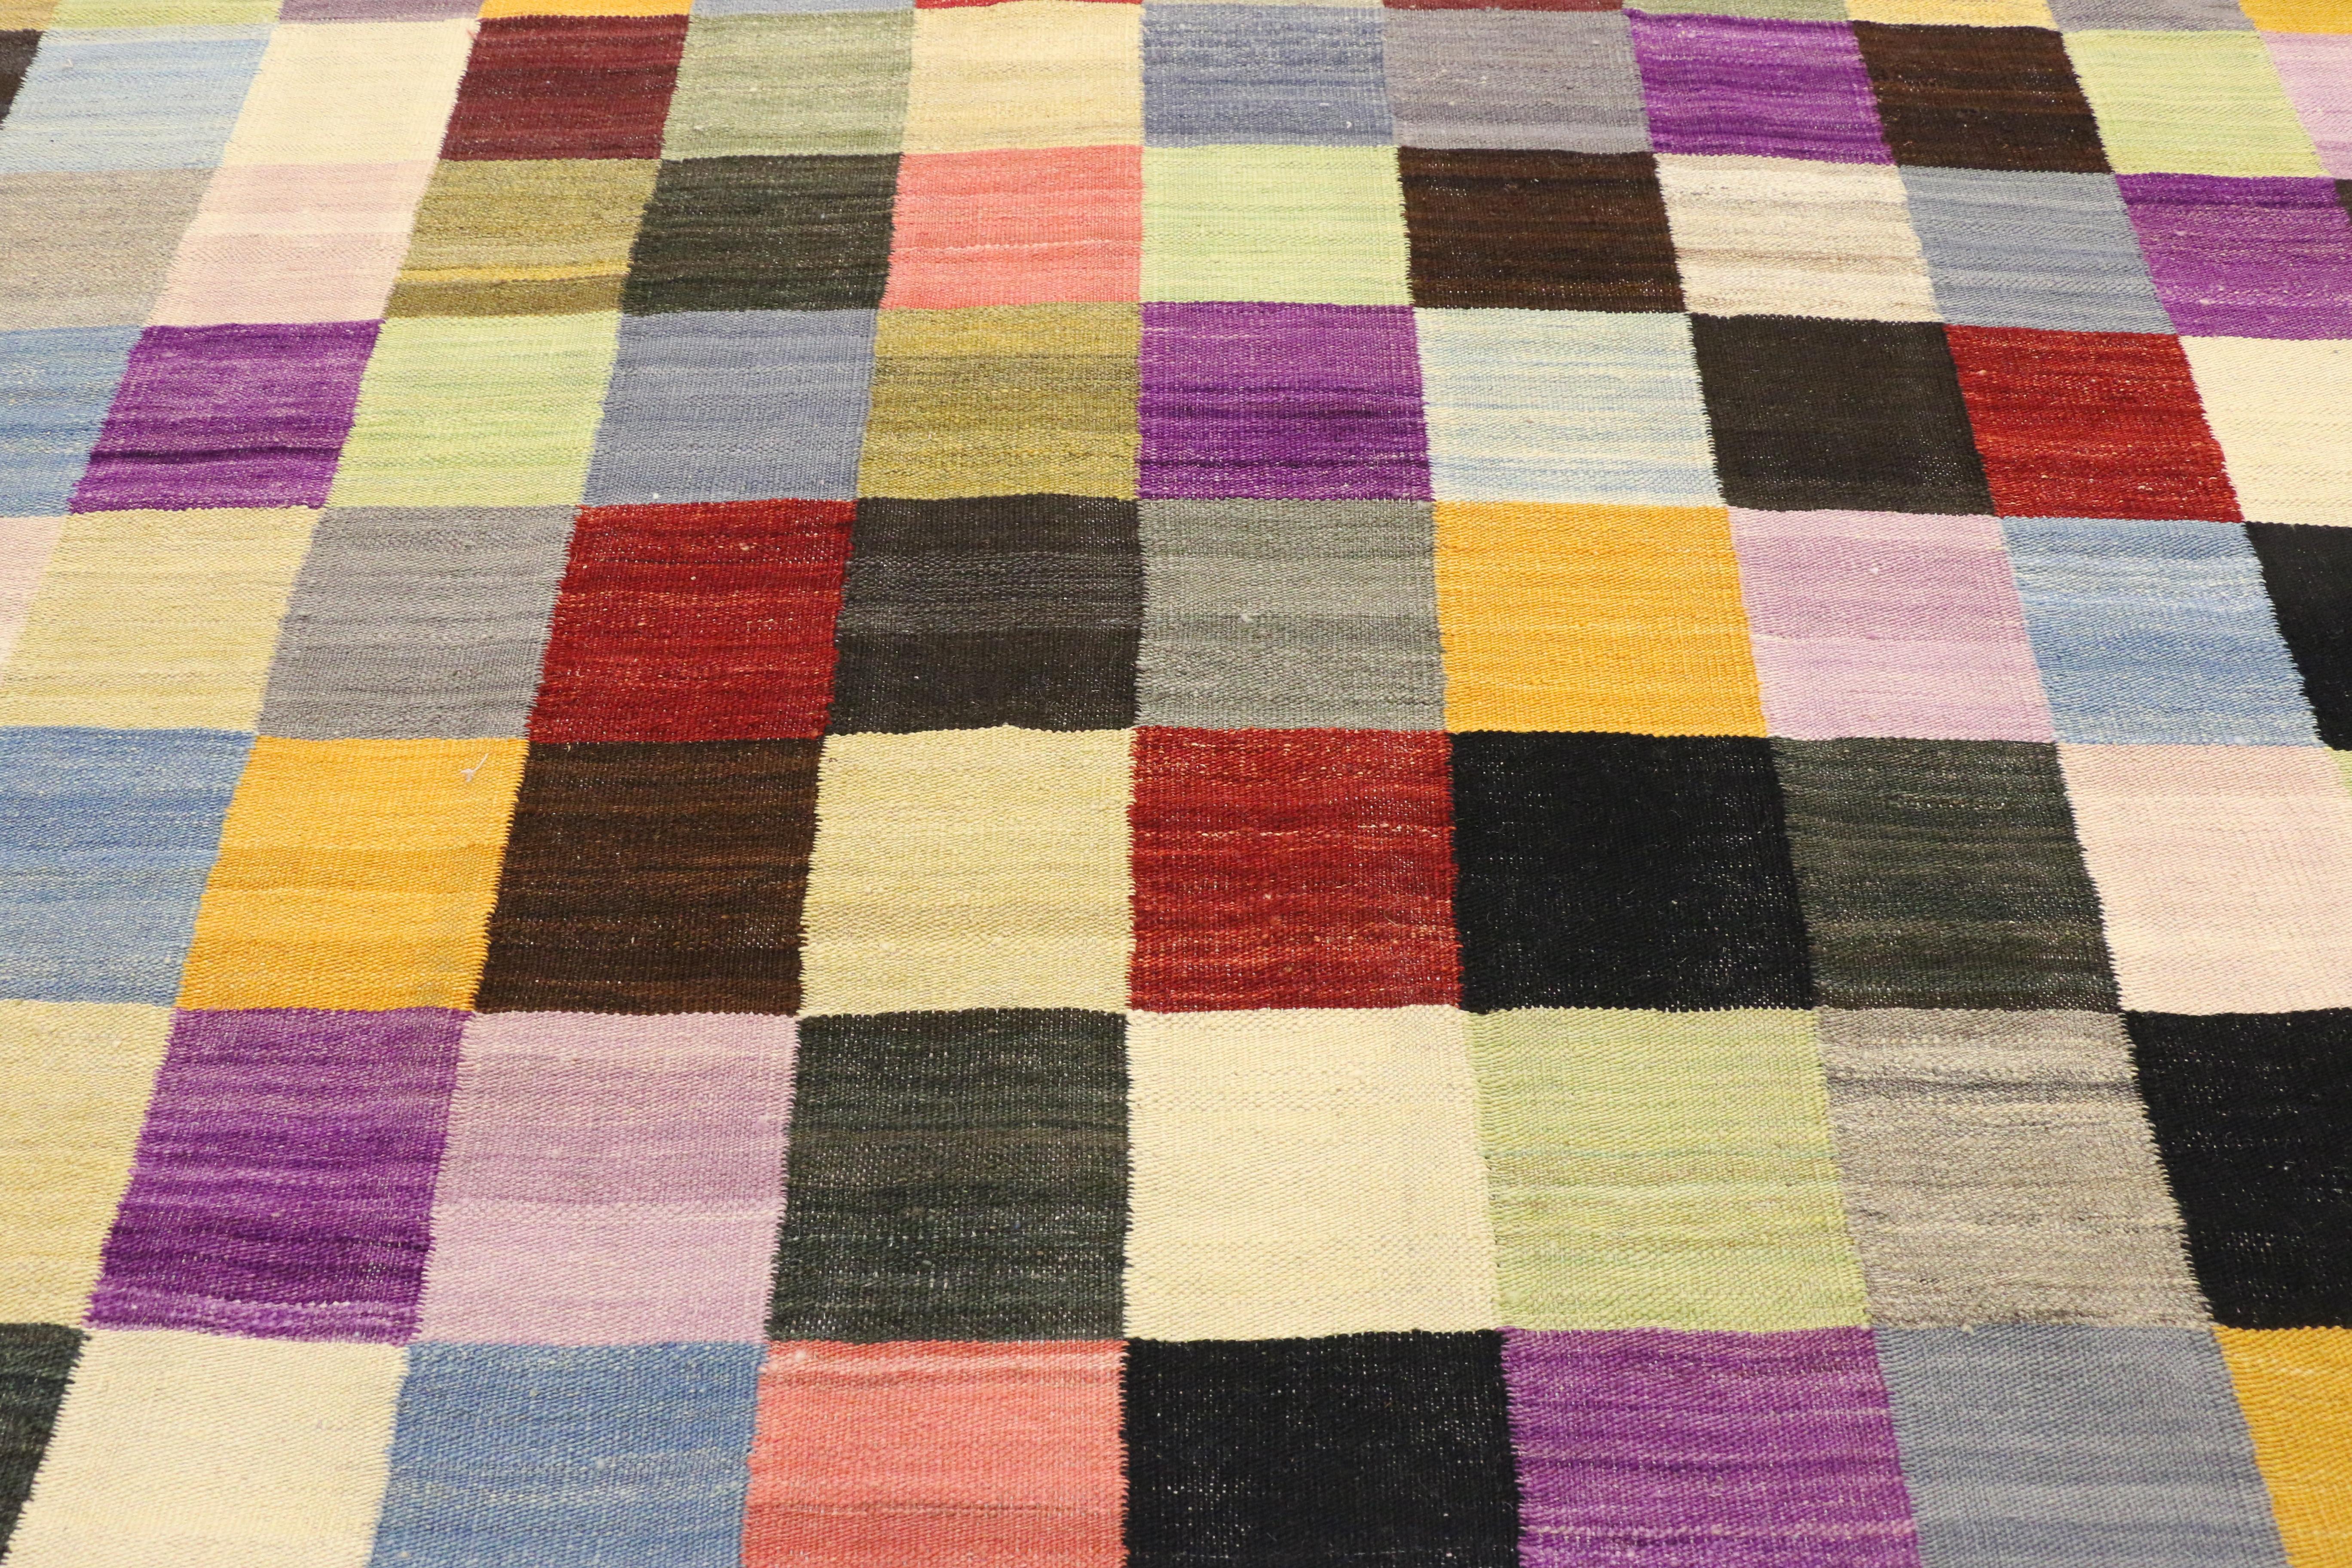 Afghan Vintage Checkered Flatweave Carpet, Midcentury Modern Meets Cubist Style For Sale